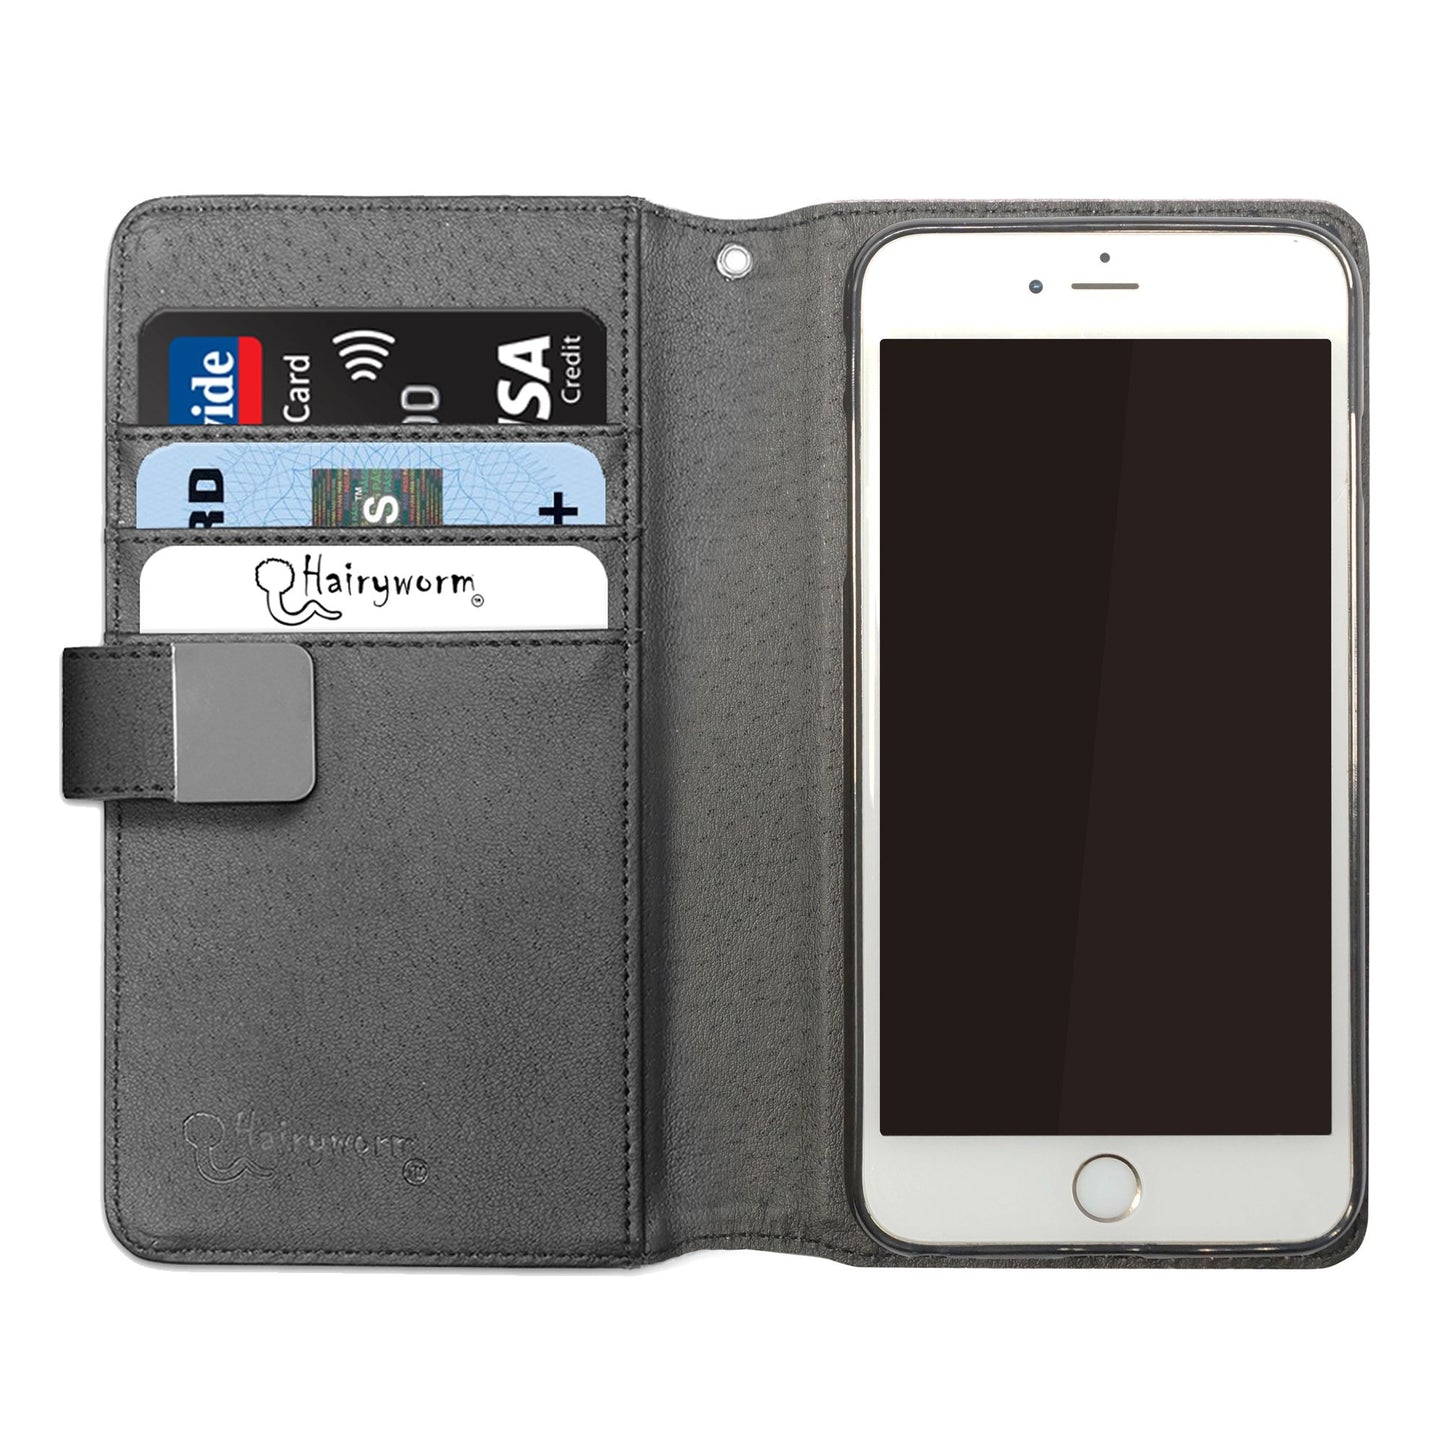 Personalised Huawei Phone Leather Wallet with Silver Floral Unicorn and Text on Dark Grey